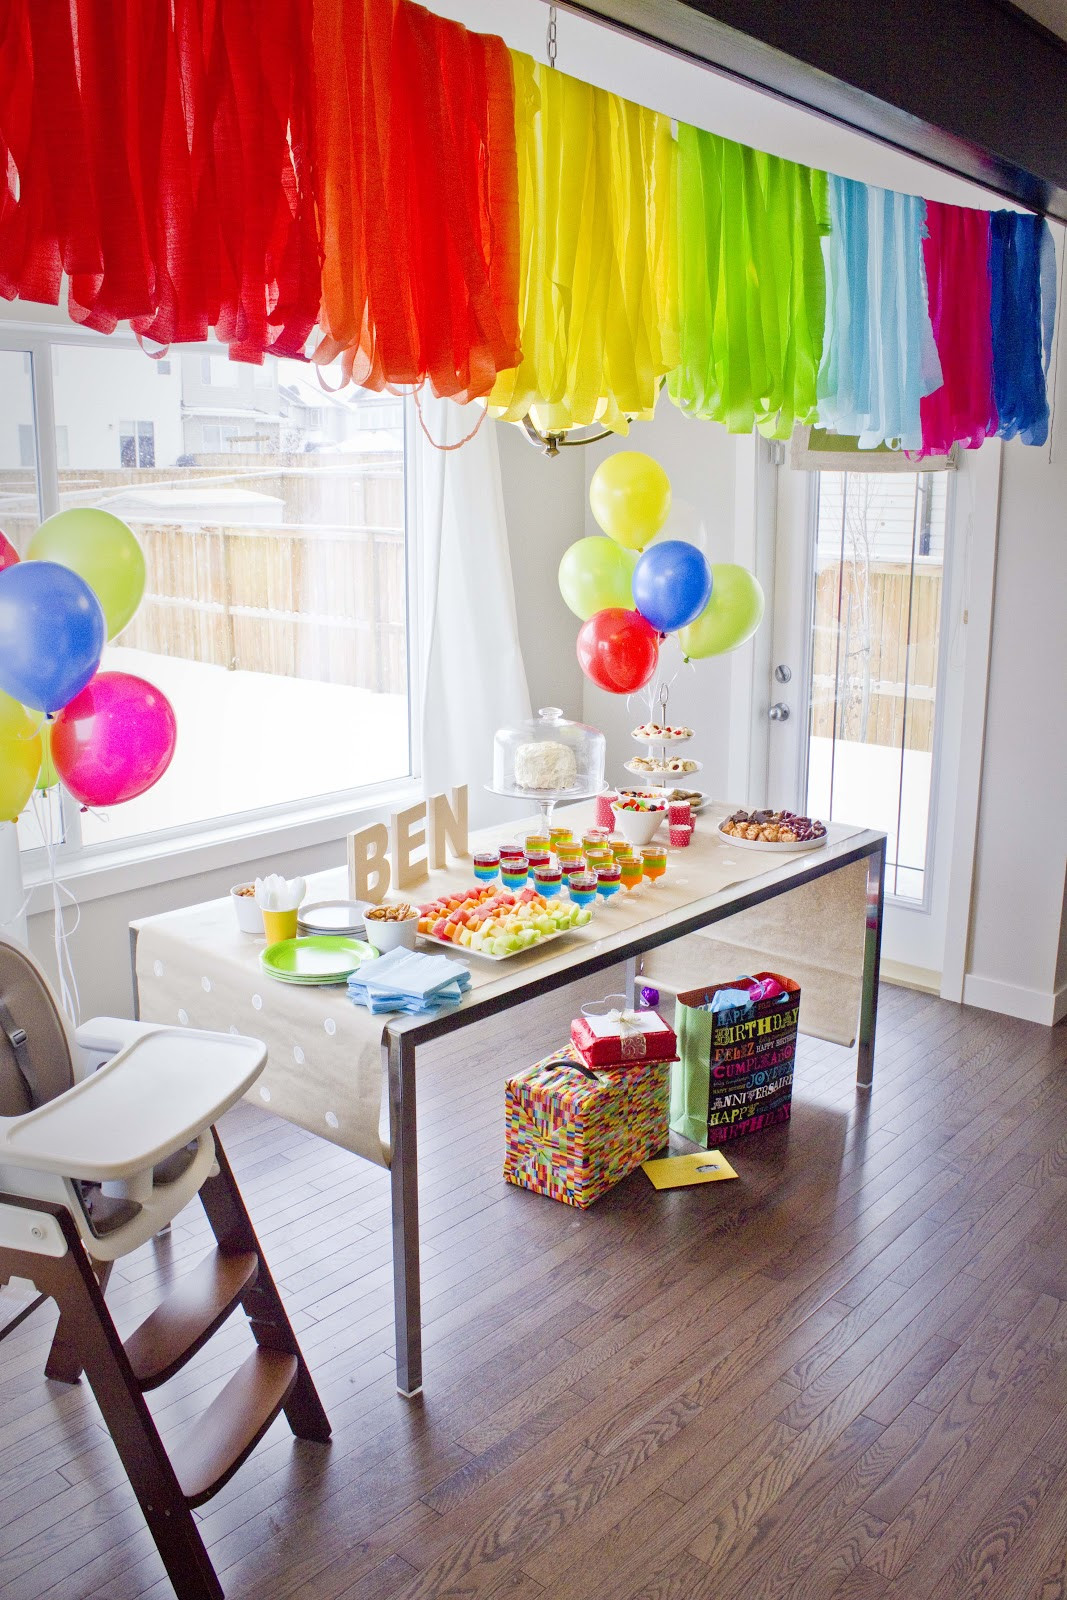 Streamer Decoration Ideas For Birthday Party
 Corner Orchid Ben s First Birthday Party